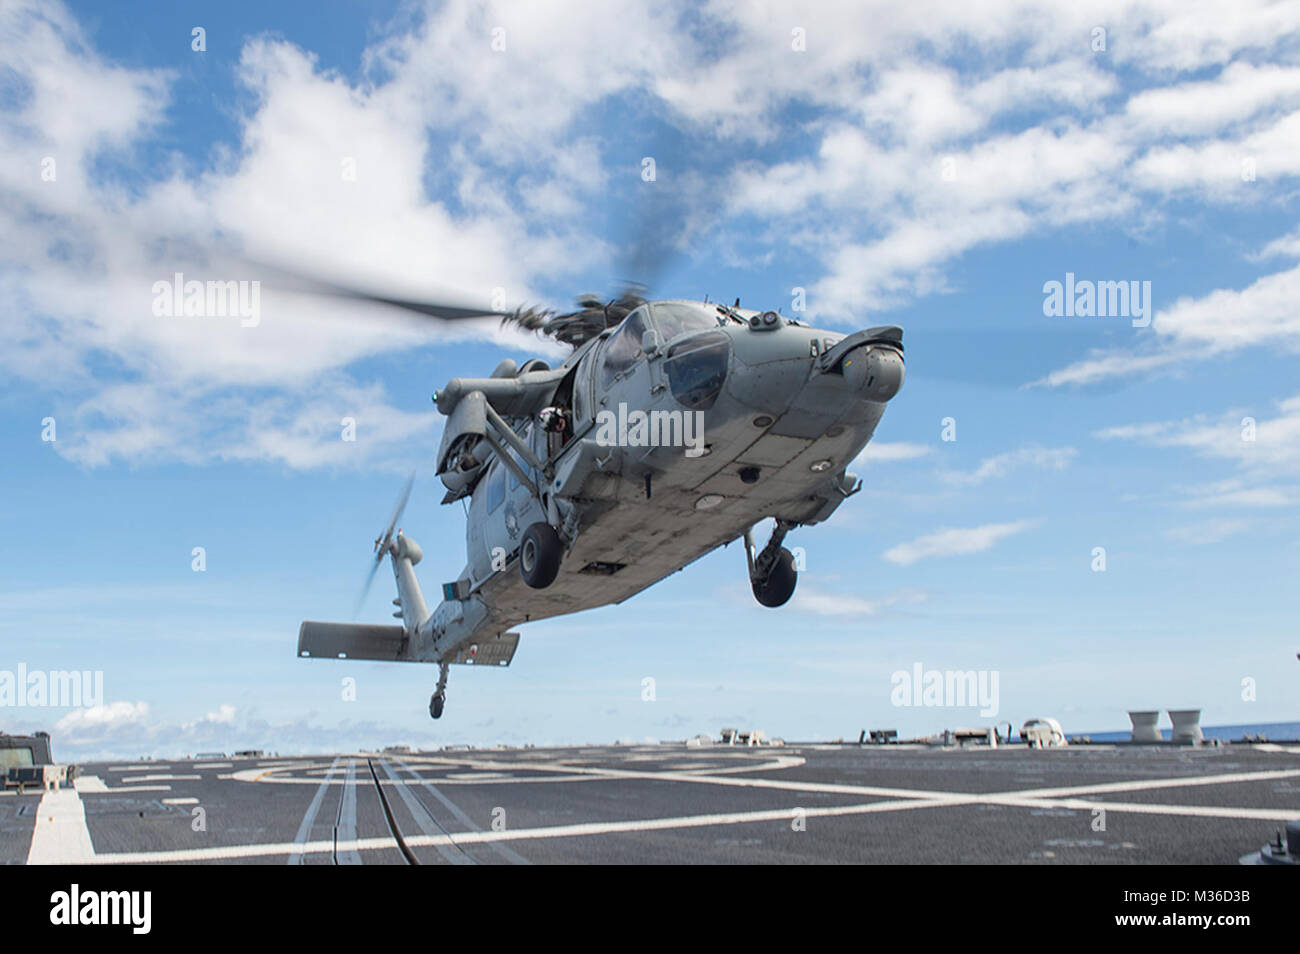 160620-N-WM647-110  PHILLIPINE SEA (June 20, 2016) An MH-60S Sea Hawk helicopter, assigned to the “Golden Falcons” of Helicopter Sea Combat Squadron (HSC) 12, takes off from the flight deck of the Arleigh-Burke class guided-missile destroyer USS McCampbell (DDG 85). McCampbell is on patrol with the Carrier Strike Group Five (CSG 5) in the U.S. 7th Fleet area of responsibility supporting security and stability in the Indo-Asia-Pacific. (U.S. Navy photo by Mass Communication Specialist 3rd Class Elesia K. Patten/Released) Flight ops on USS McCampbell during Carrier Strike Group Five (CSG 5) patr Stock Photo